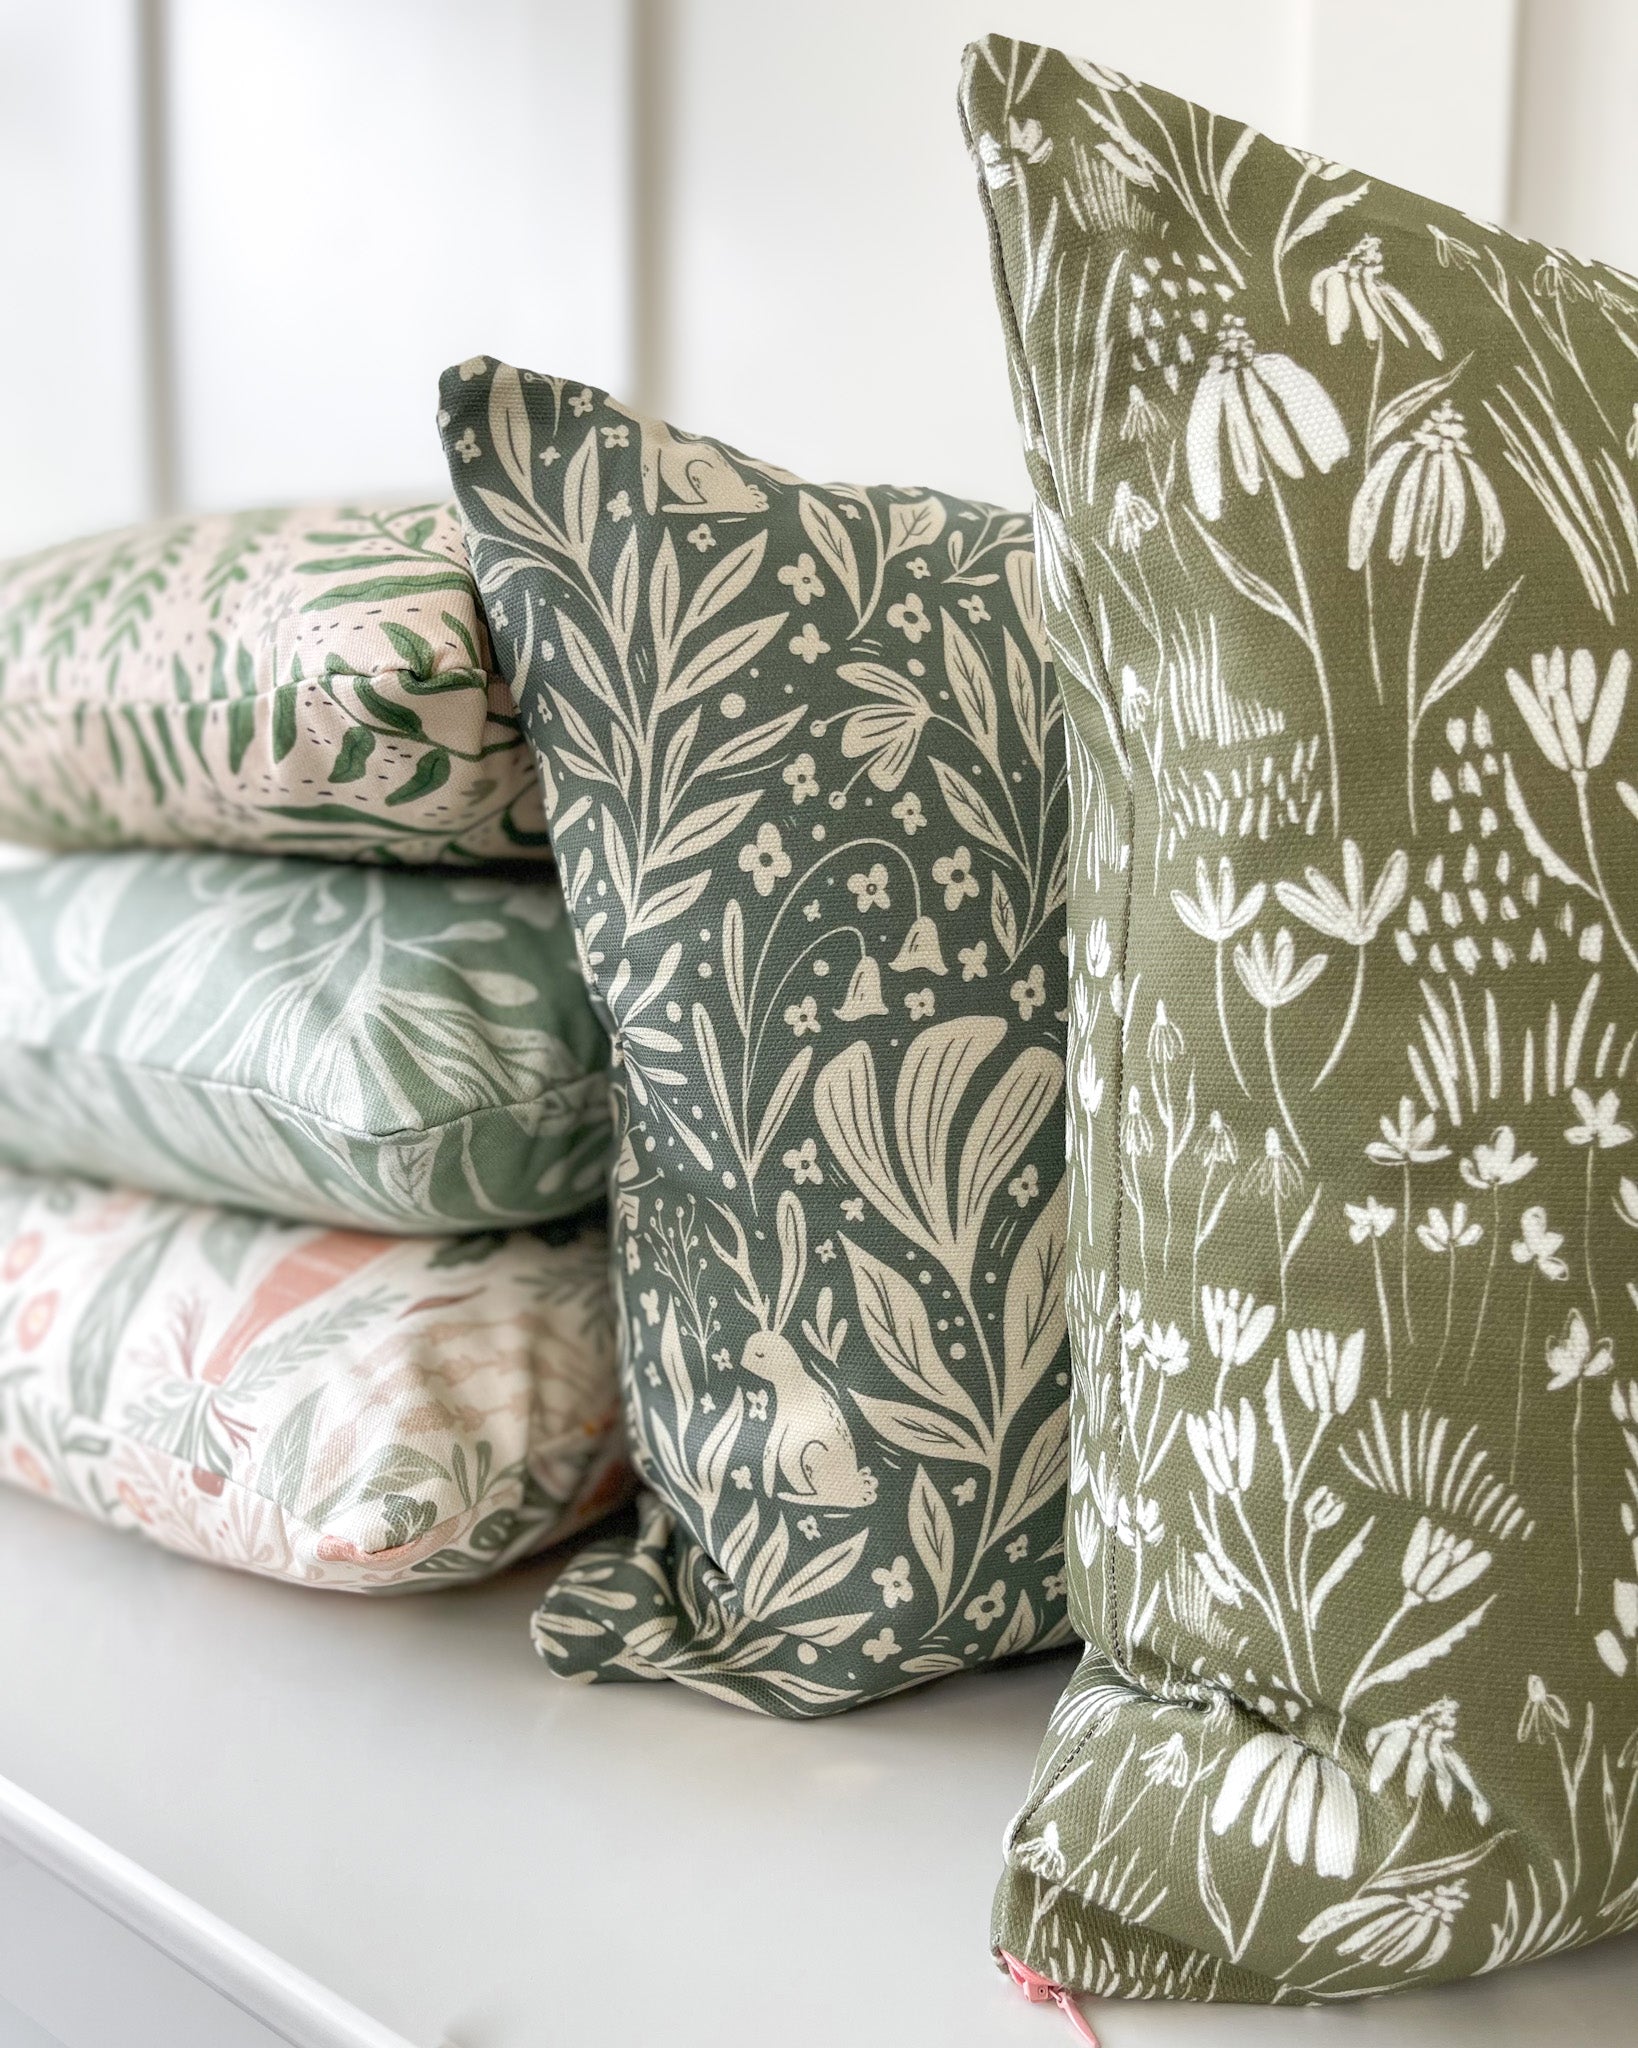 Wildflower Meadow Cushion featuring a warm deep green background with a cream wildflower pattern, made of basketweave cotton with a duck feather insert, designed by independent artists.